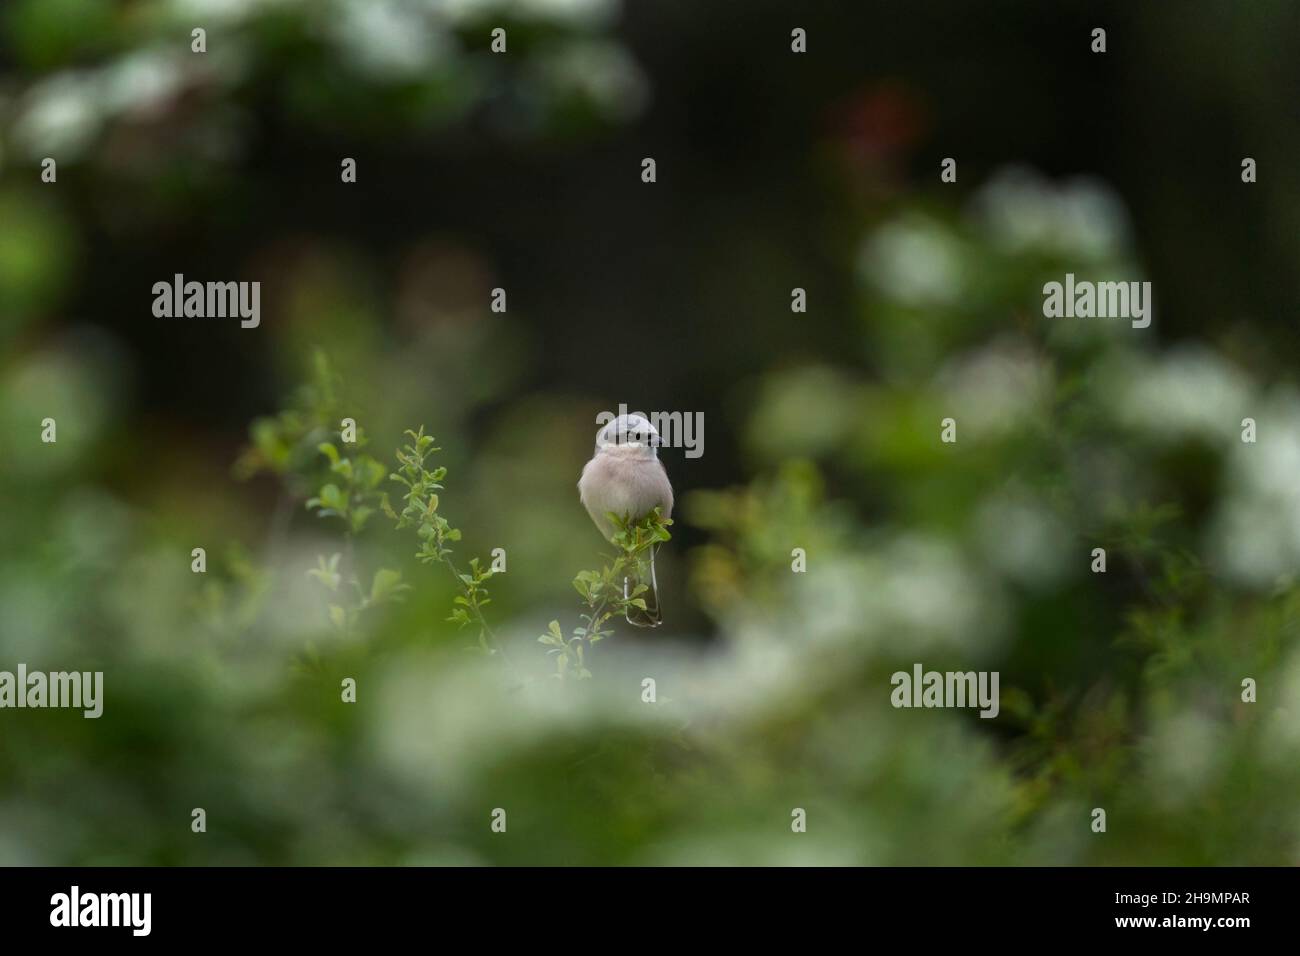 Red backed shrike on the branch. Small white bird hides in the bushes. European wildlife. Stock Photo